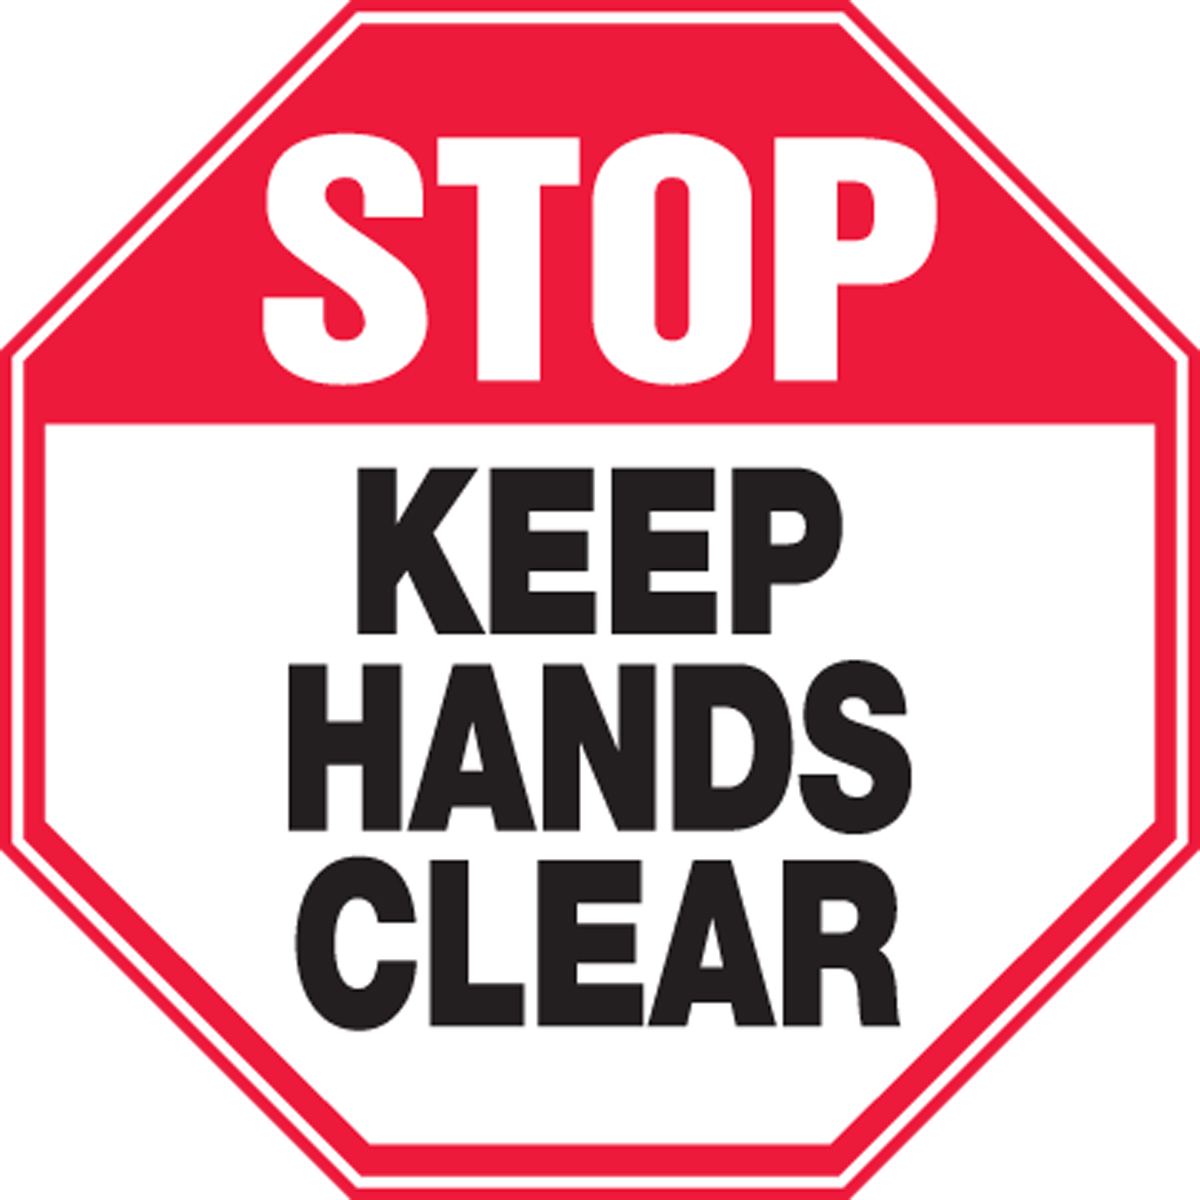 STOP KEEP HANDS CLEAR